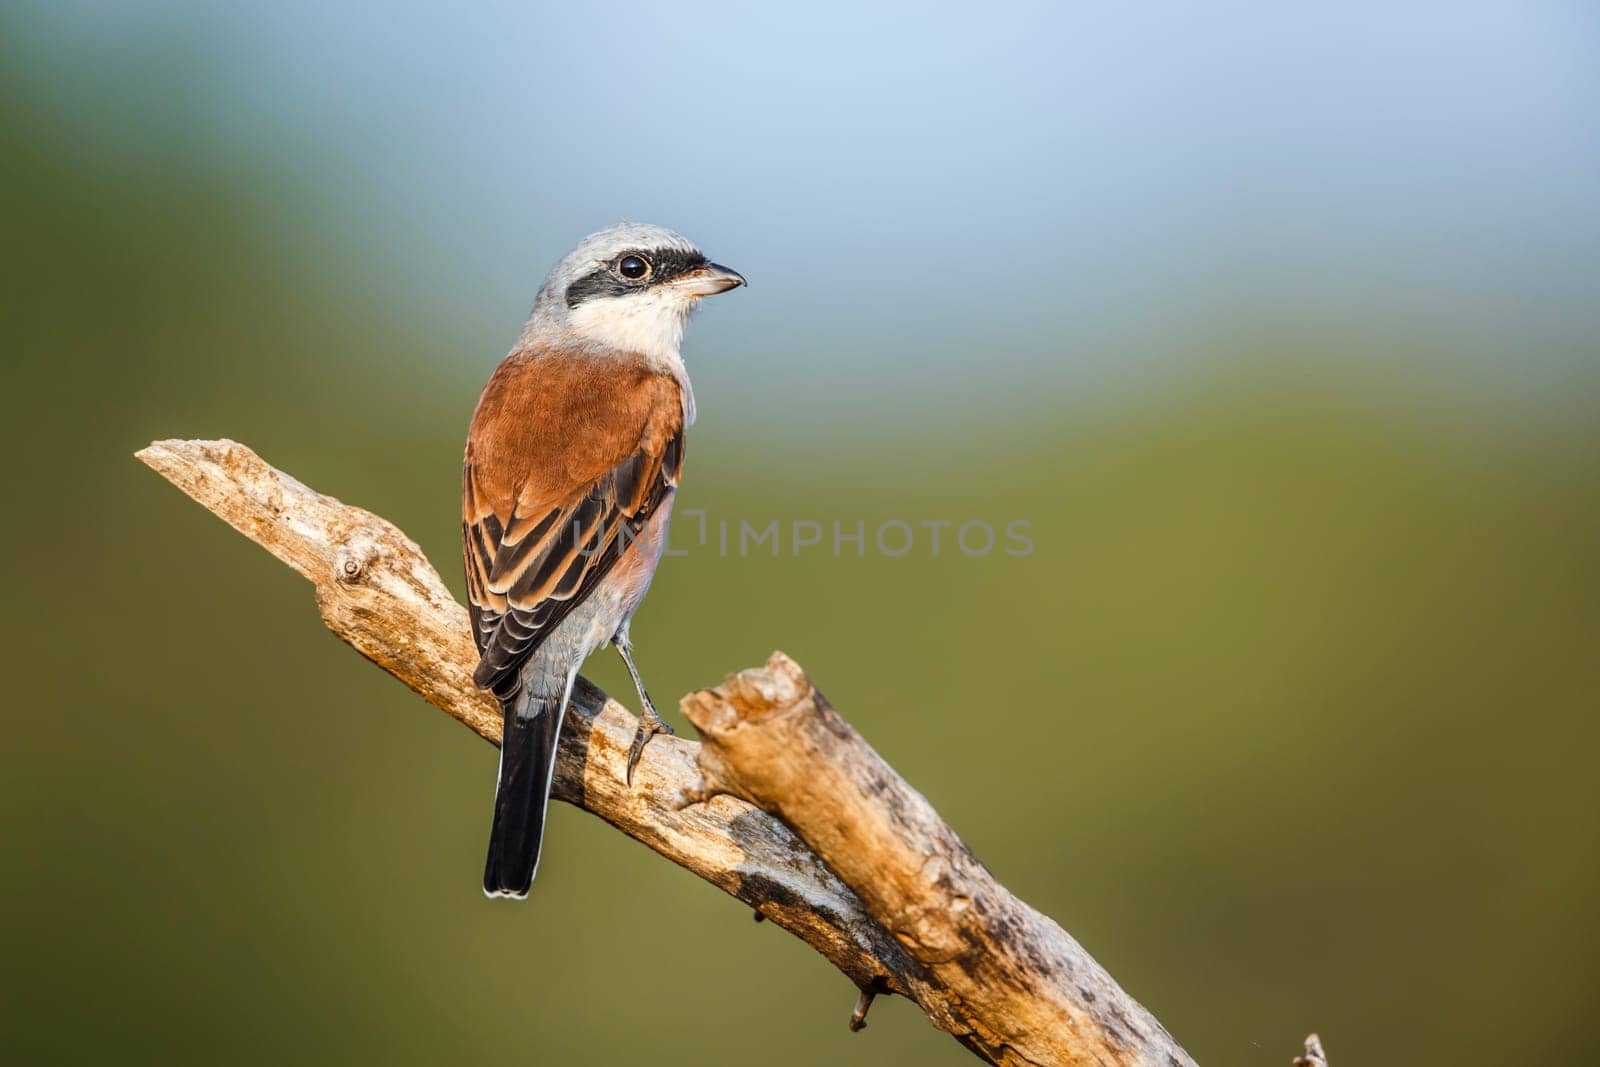 Red backed shrike in Kruger national park, South Africa by PACOCOMO